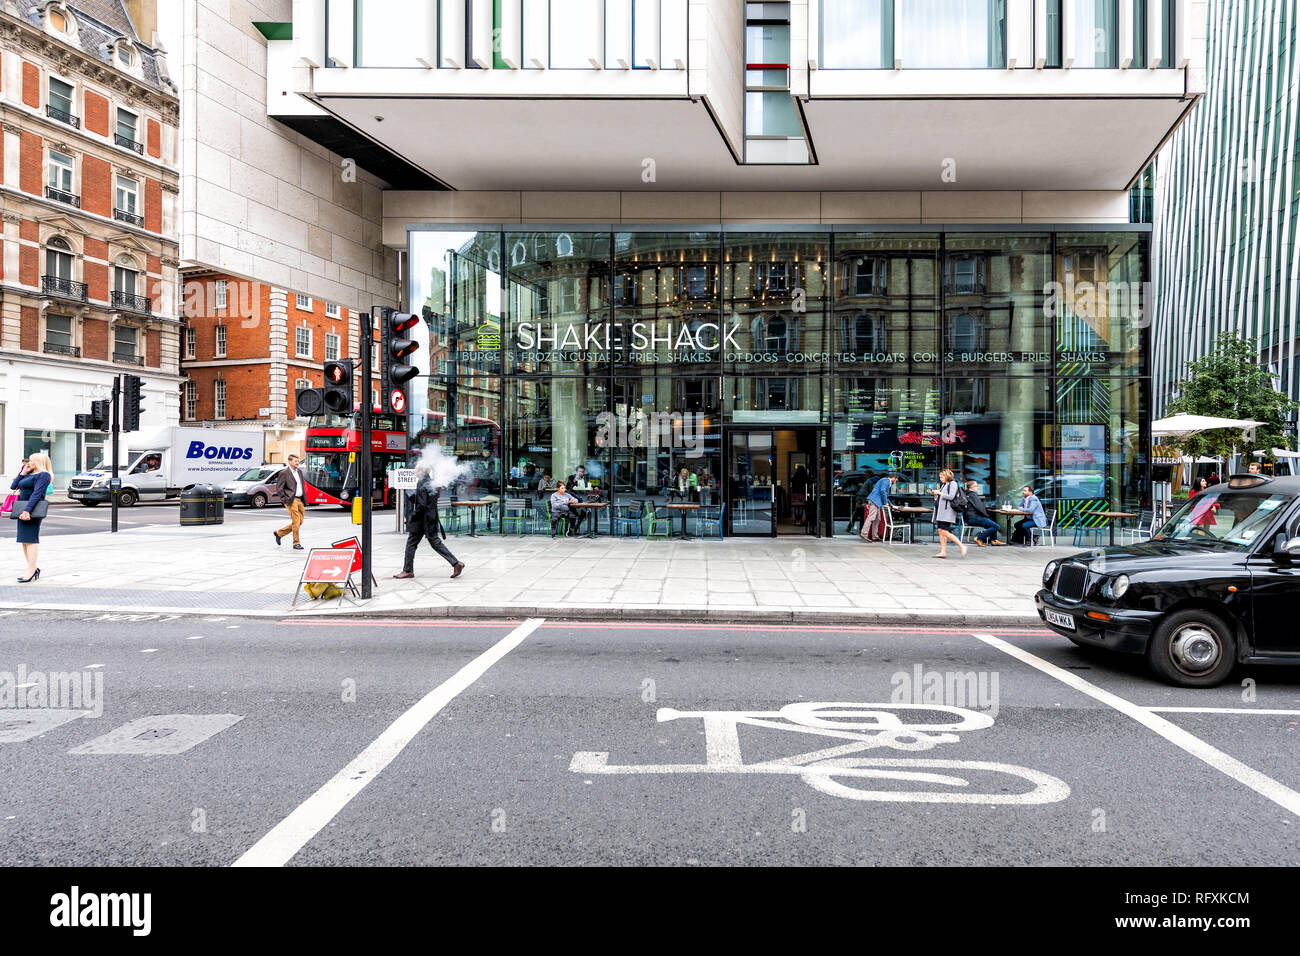 London, UK - September 12, 2018: Buckingham Palace road street during day with people walking on pavement by stores shops and Shake Shack restaurant Stock Photo